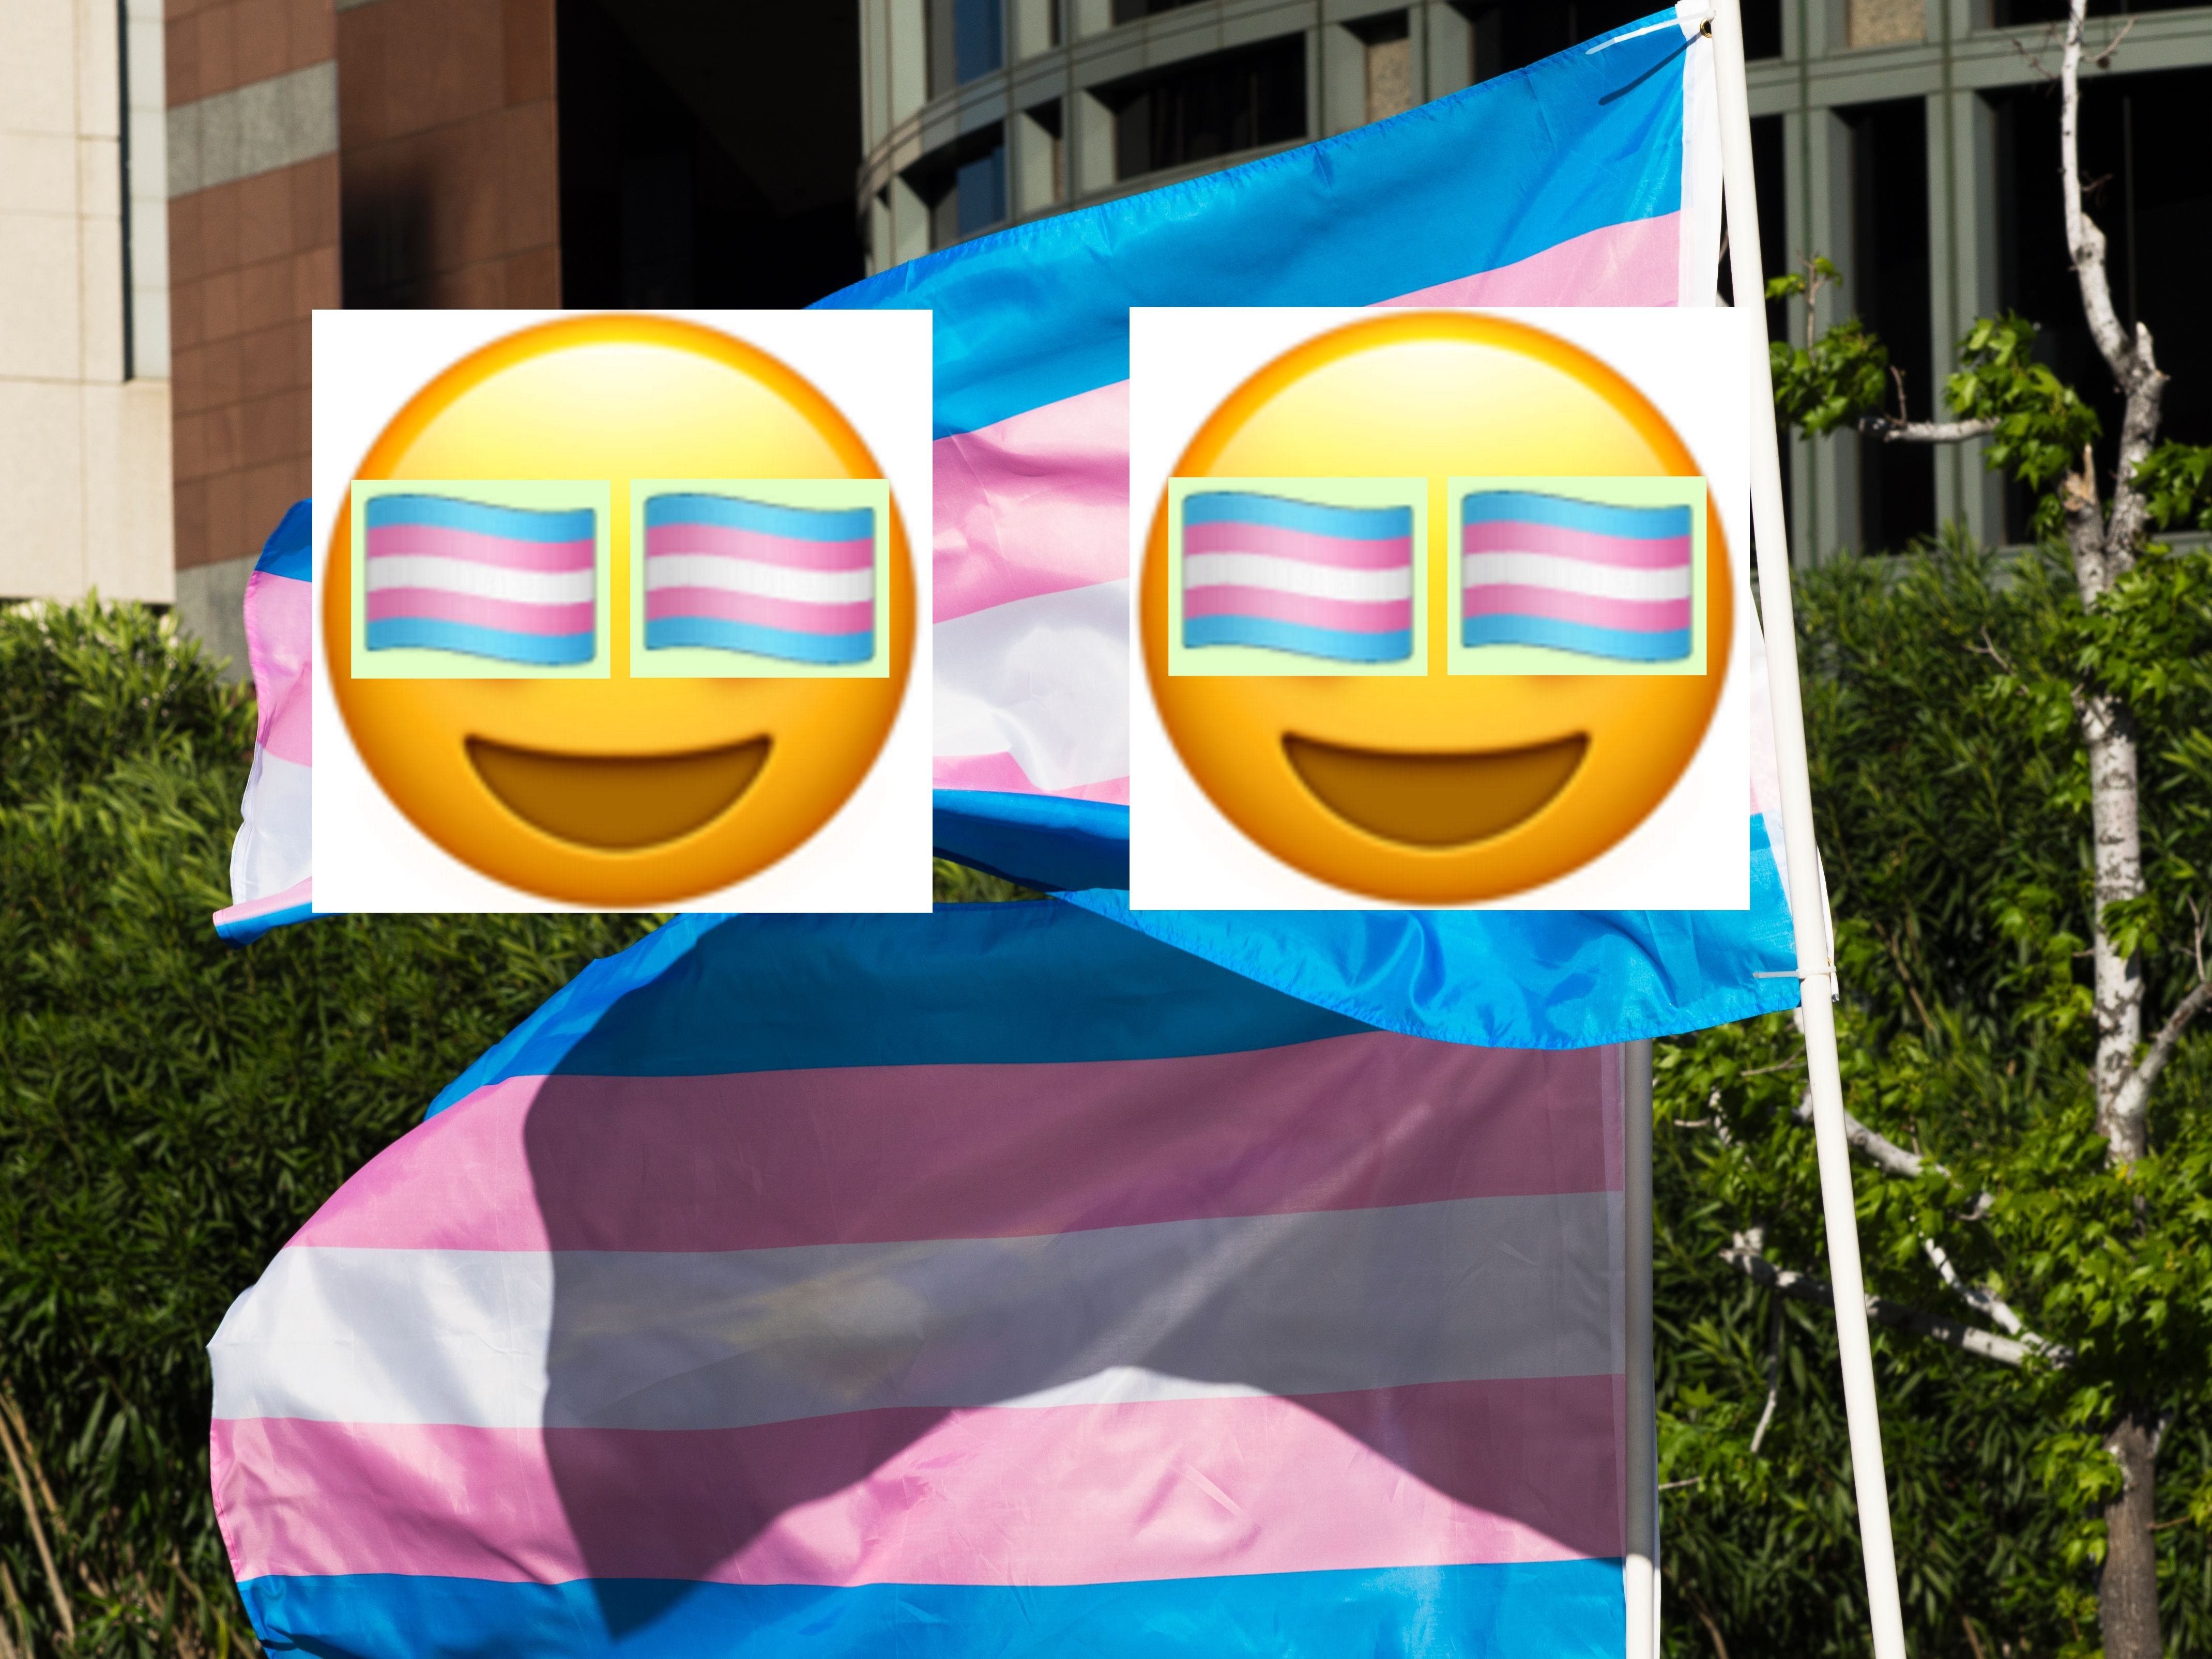 A transgender Pride flag emoji exists—here's how to get it